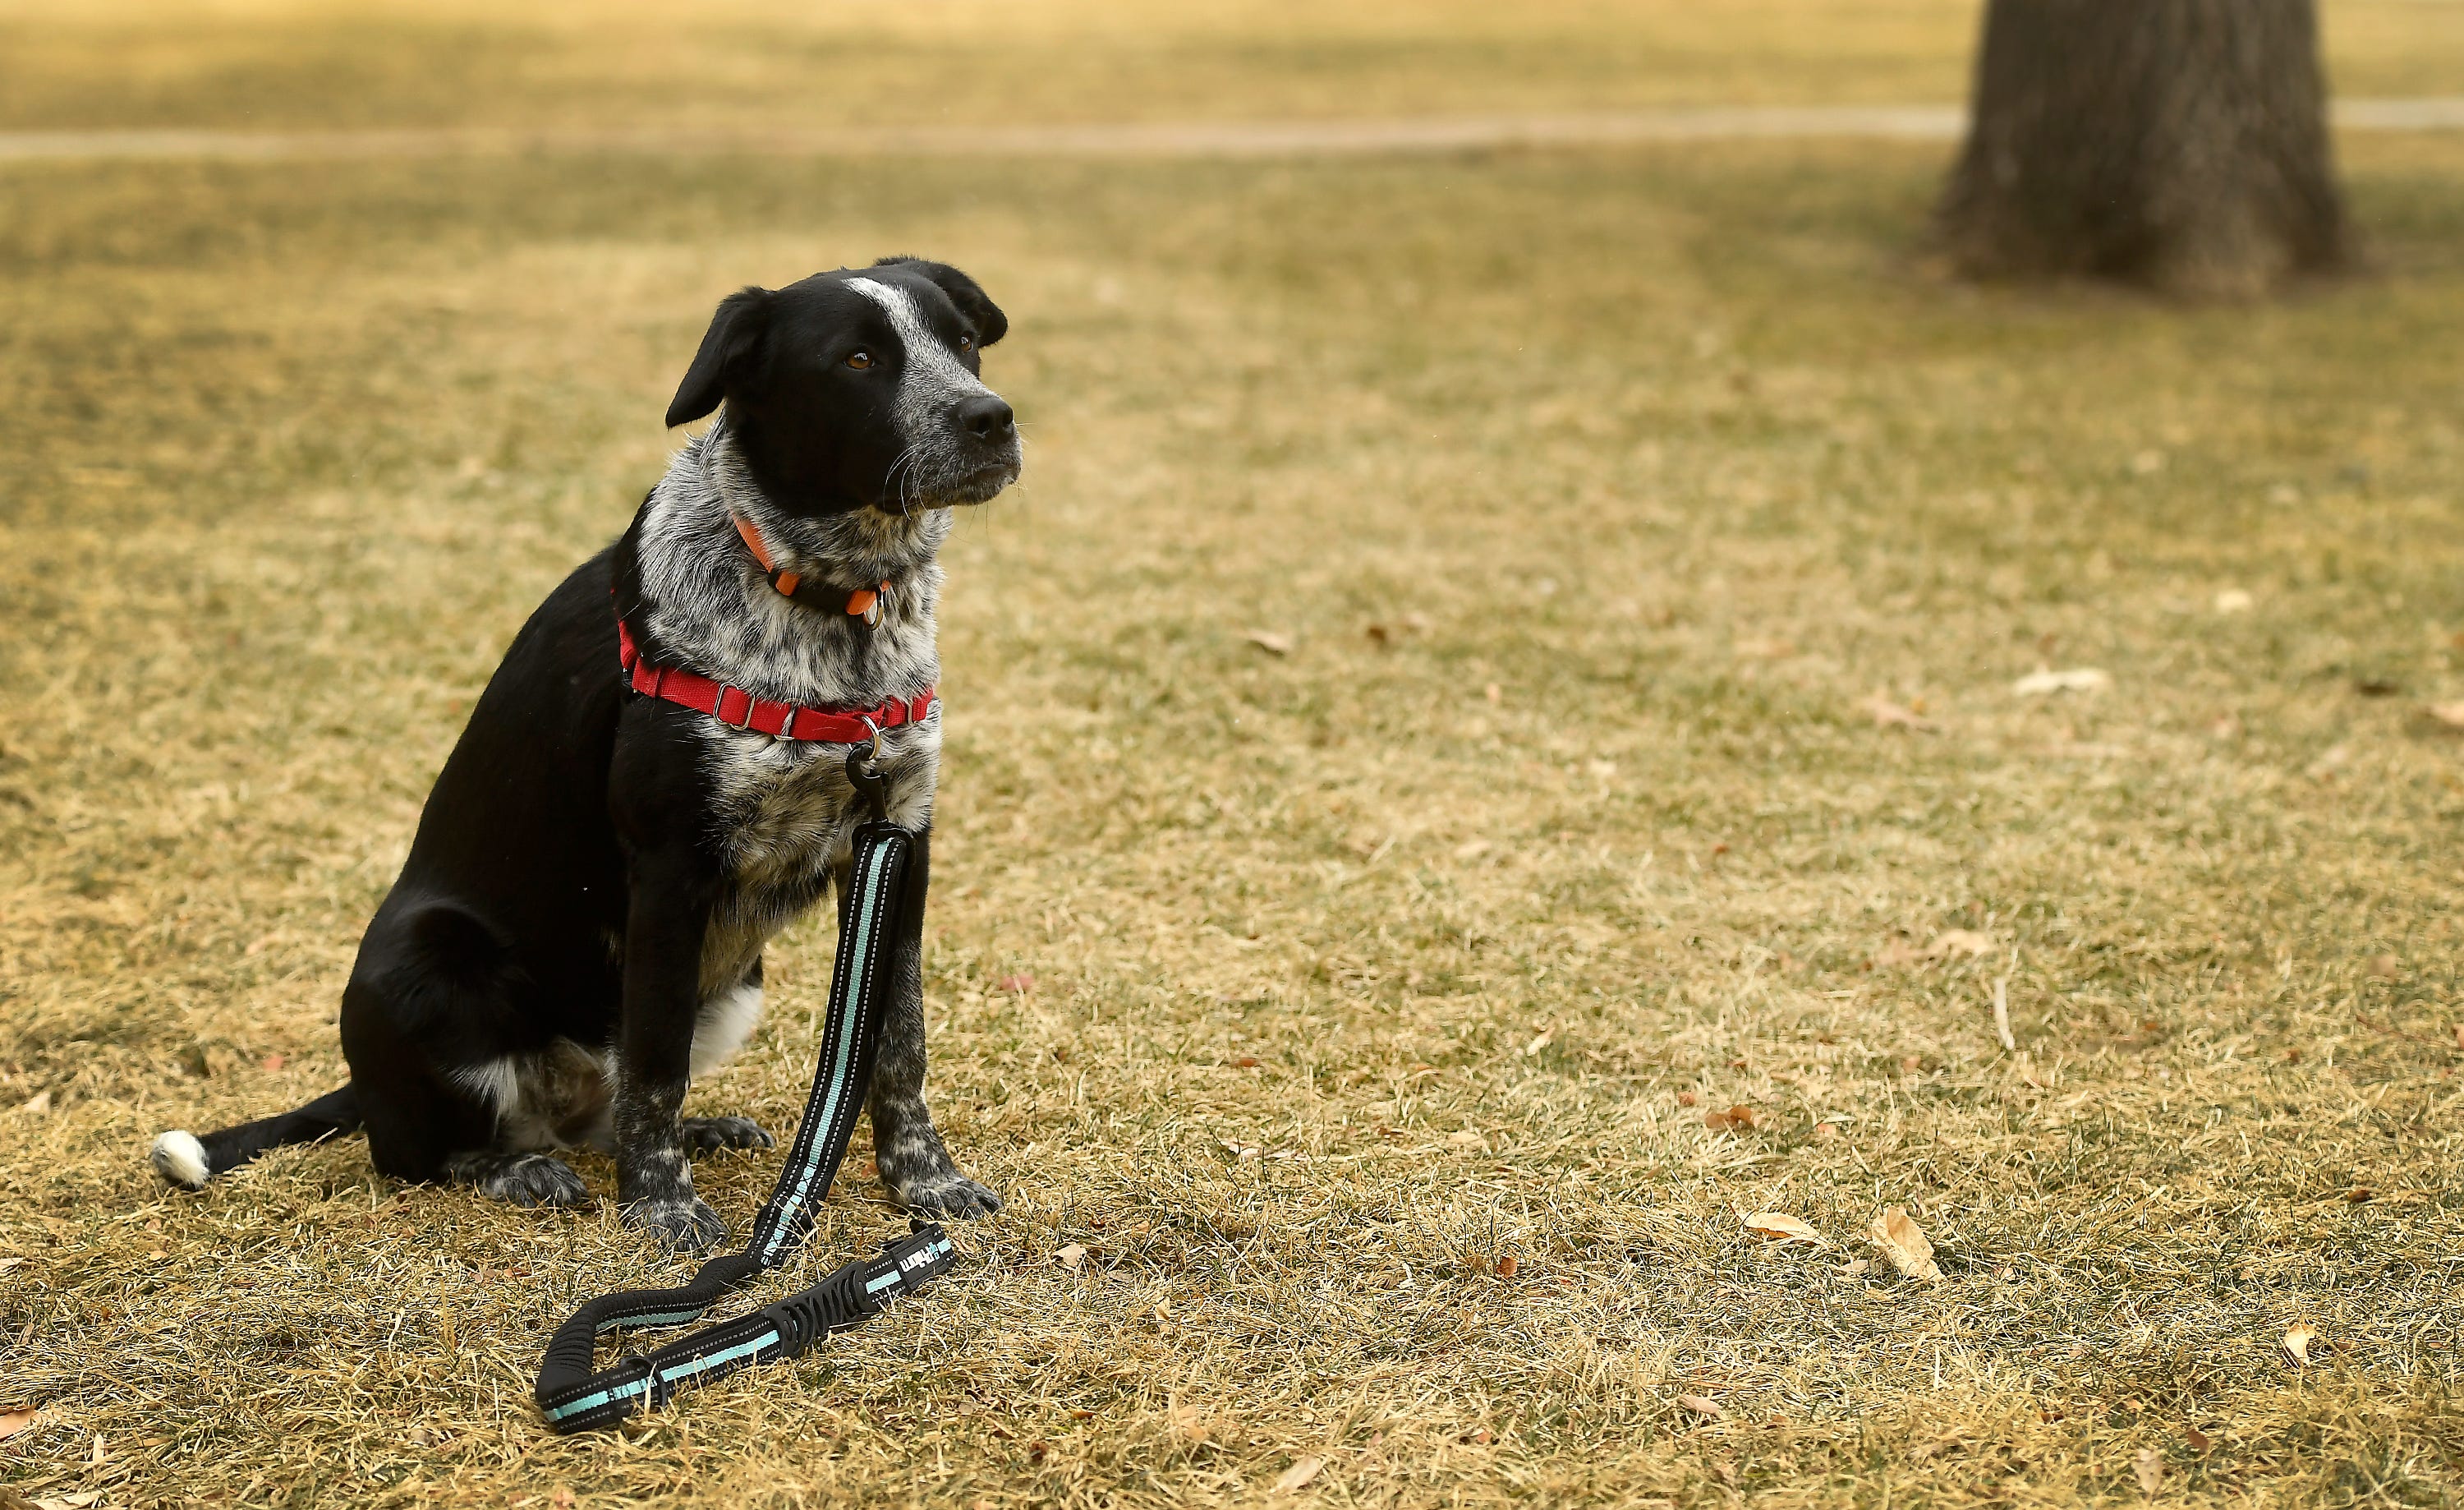 Aspen, a cattle dog mix, sits for Emma Shin, the executive director for Rocky Mountain Puppy Rescue, at Fickel Park in Berthoud, Colo. on Thursday, January 30, 2020. Aspen will represent Colorado in Animal Planet’s Puppy Bowl on Super Bowl Sunday.